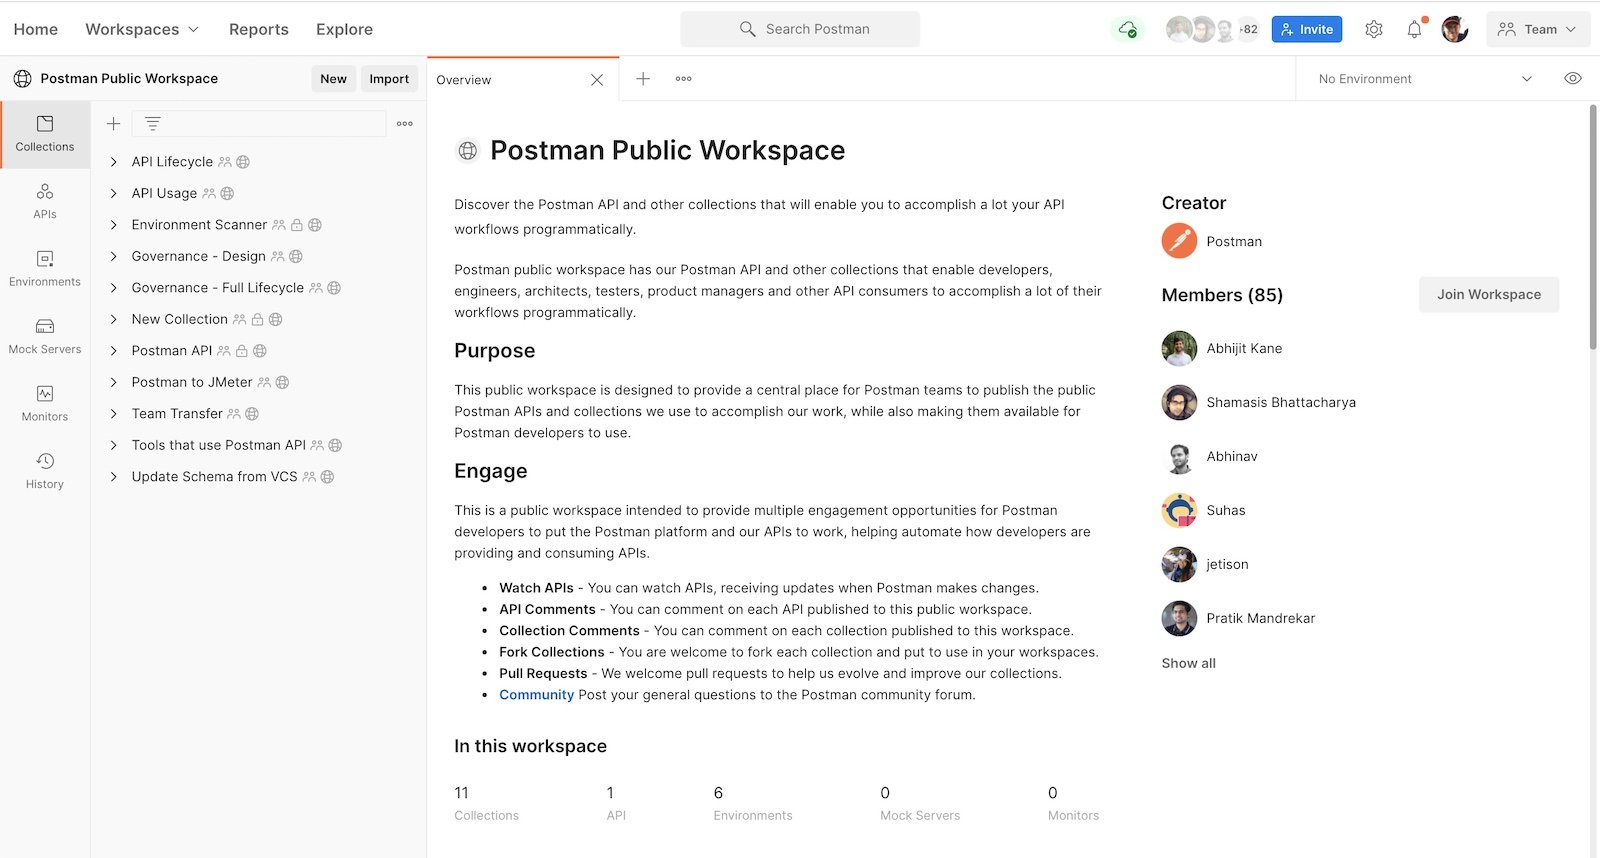 Example of an Overview page, from the Postman Public Workspace